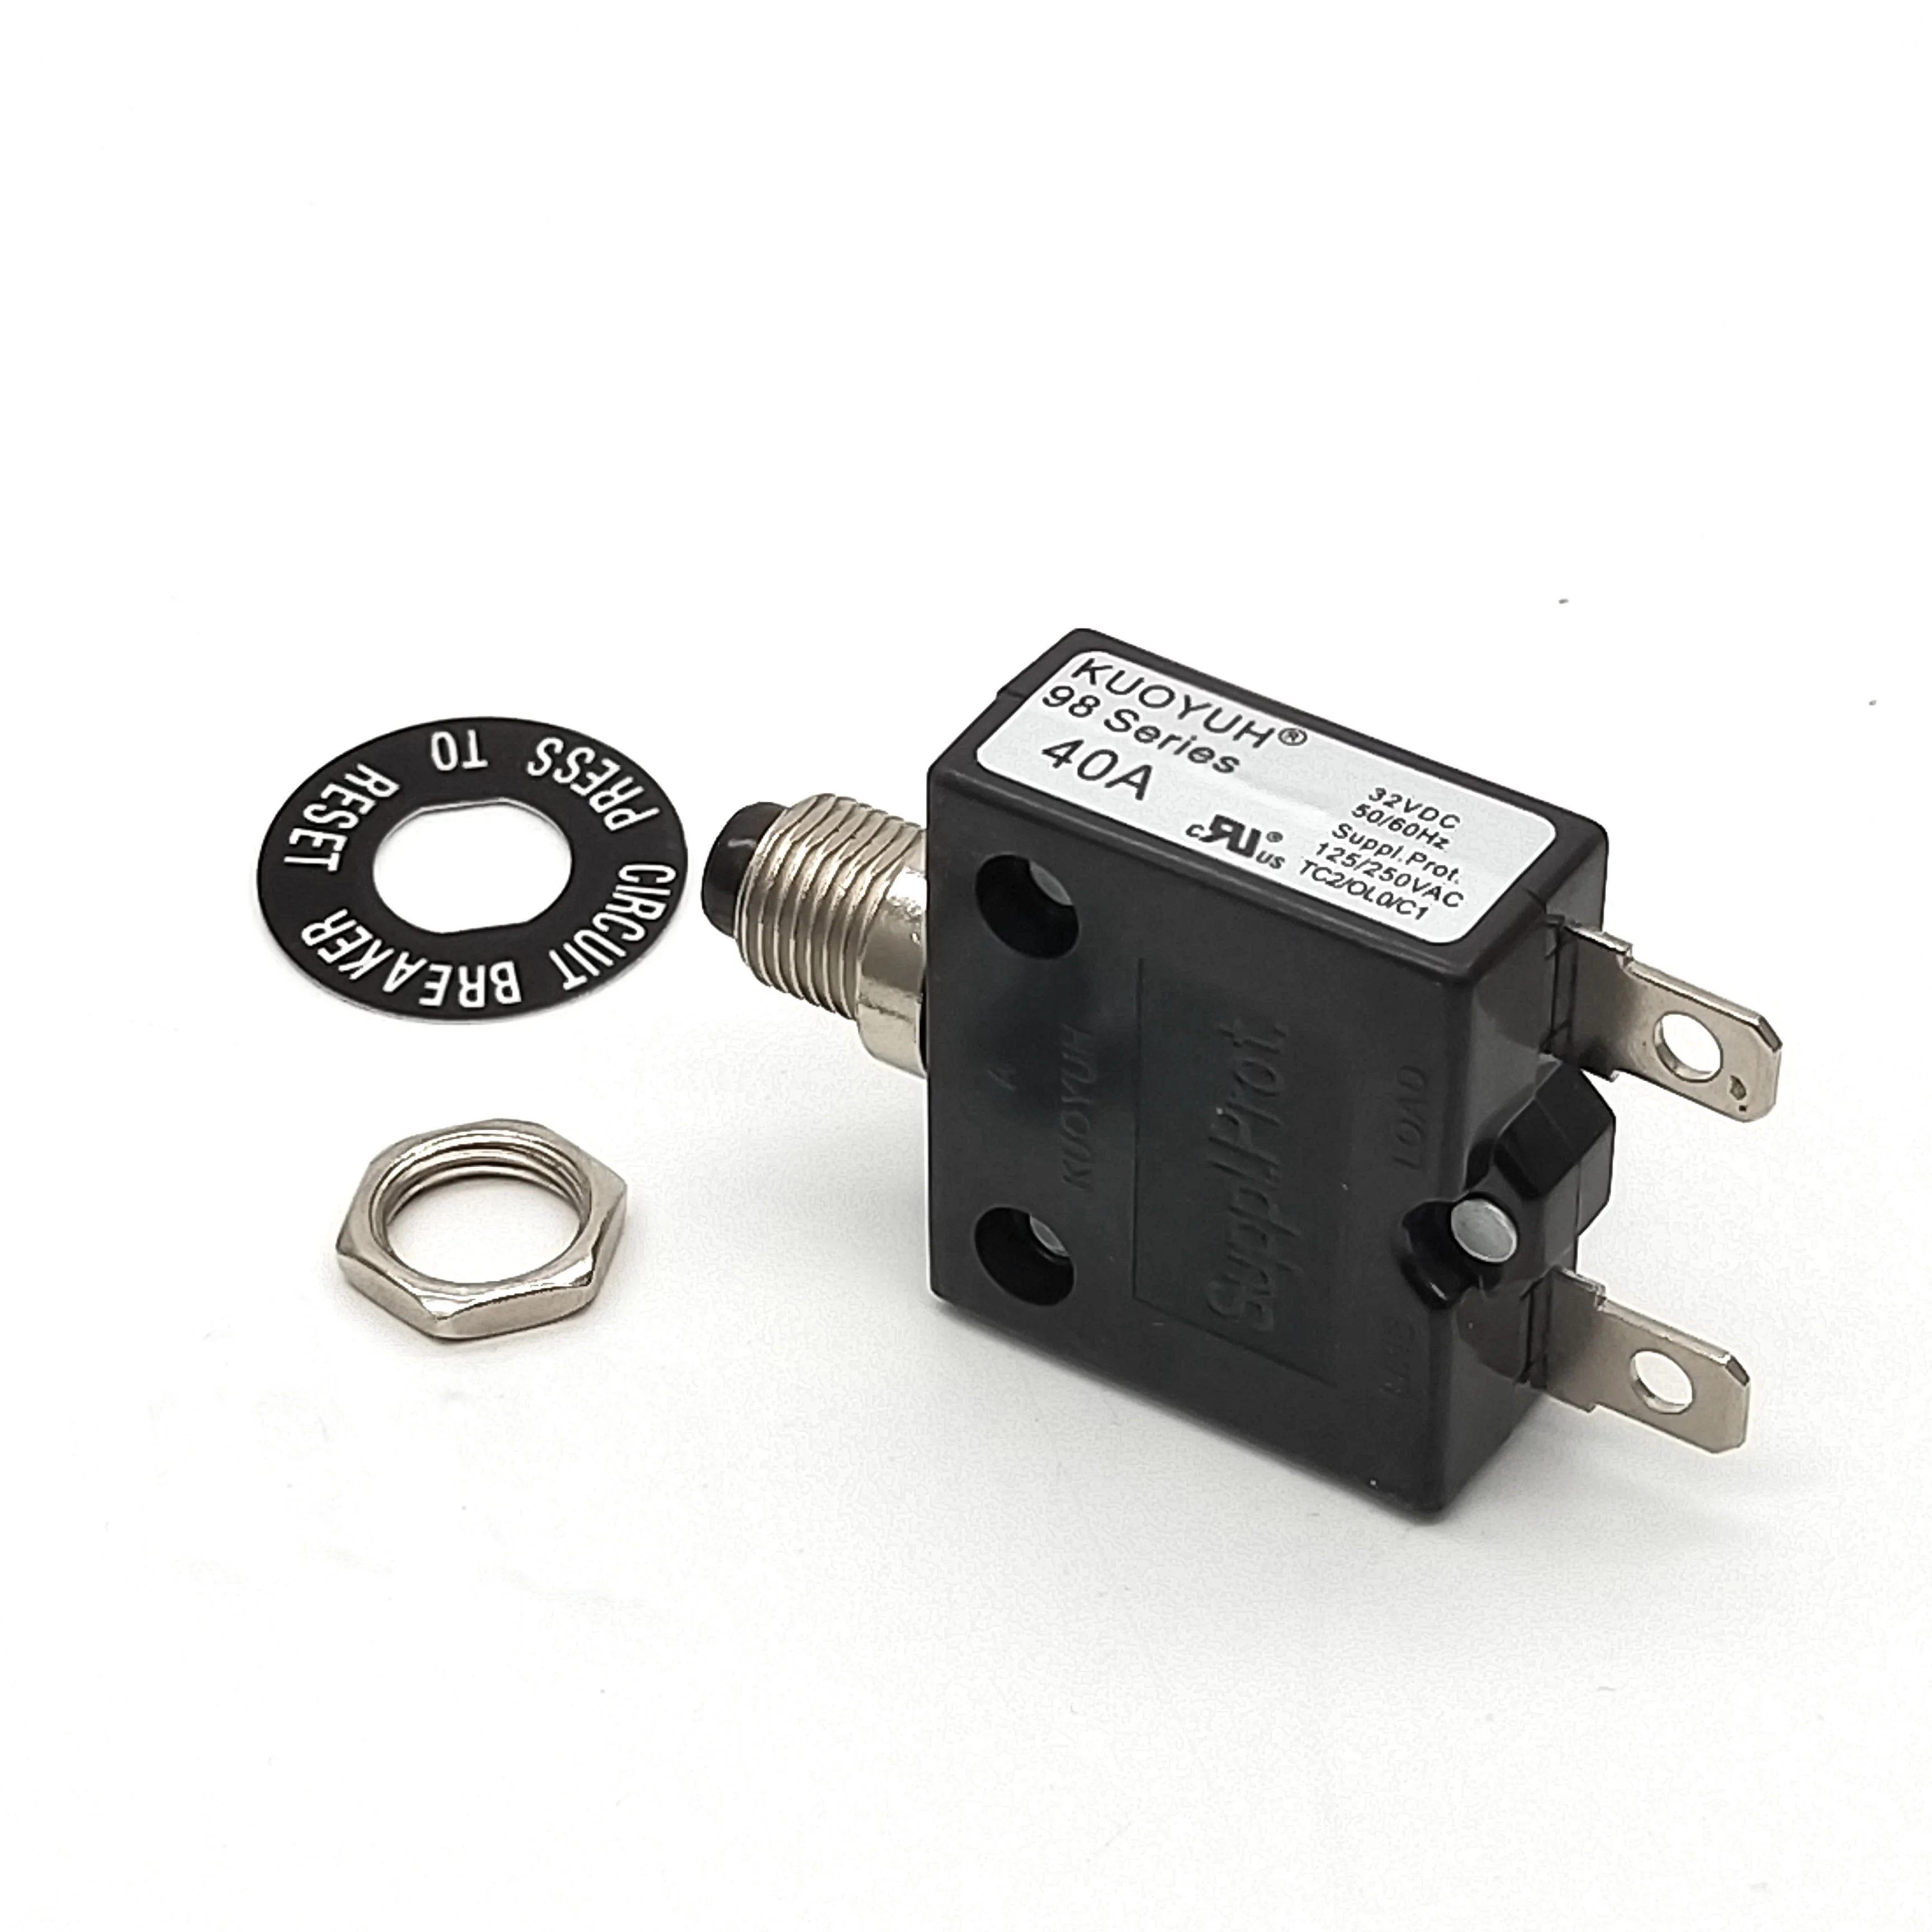 Motor Protection Switch 13A/250V With Plug-Ins And Fastening Nut 